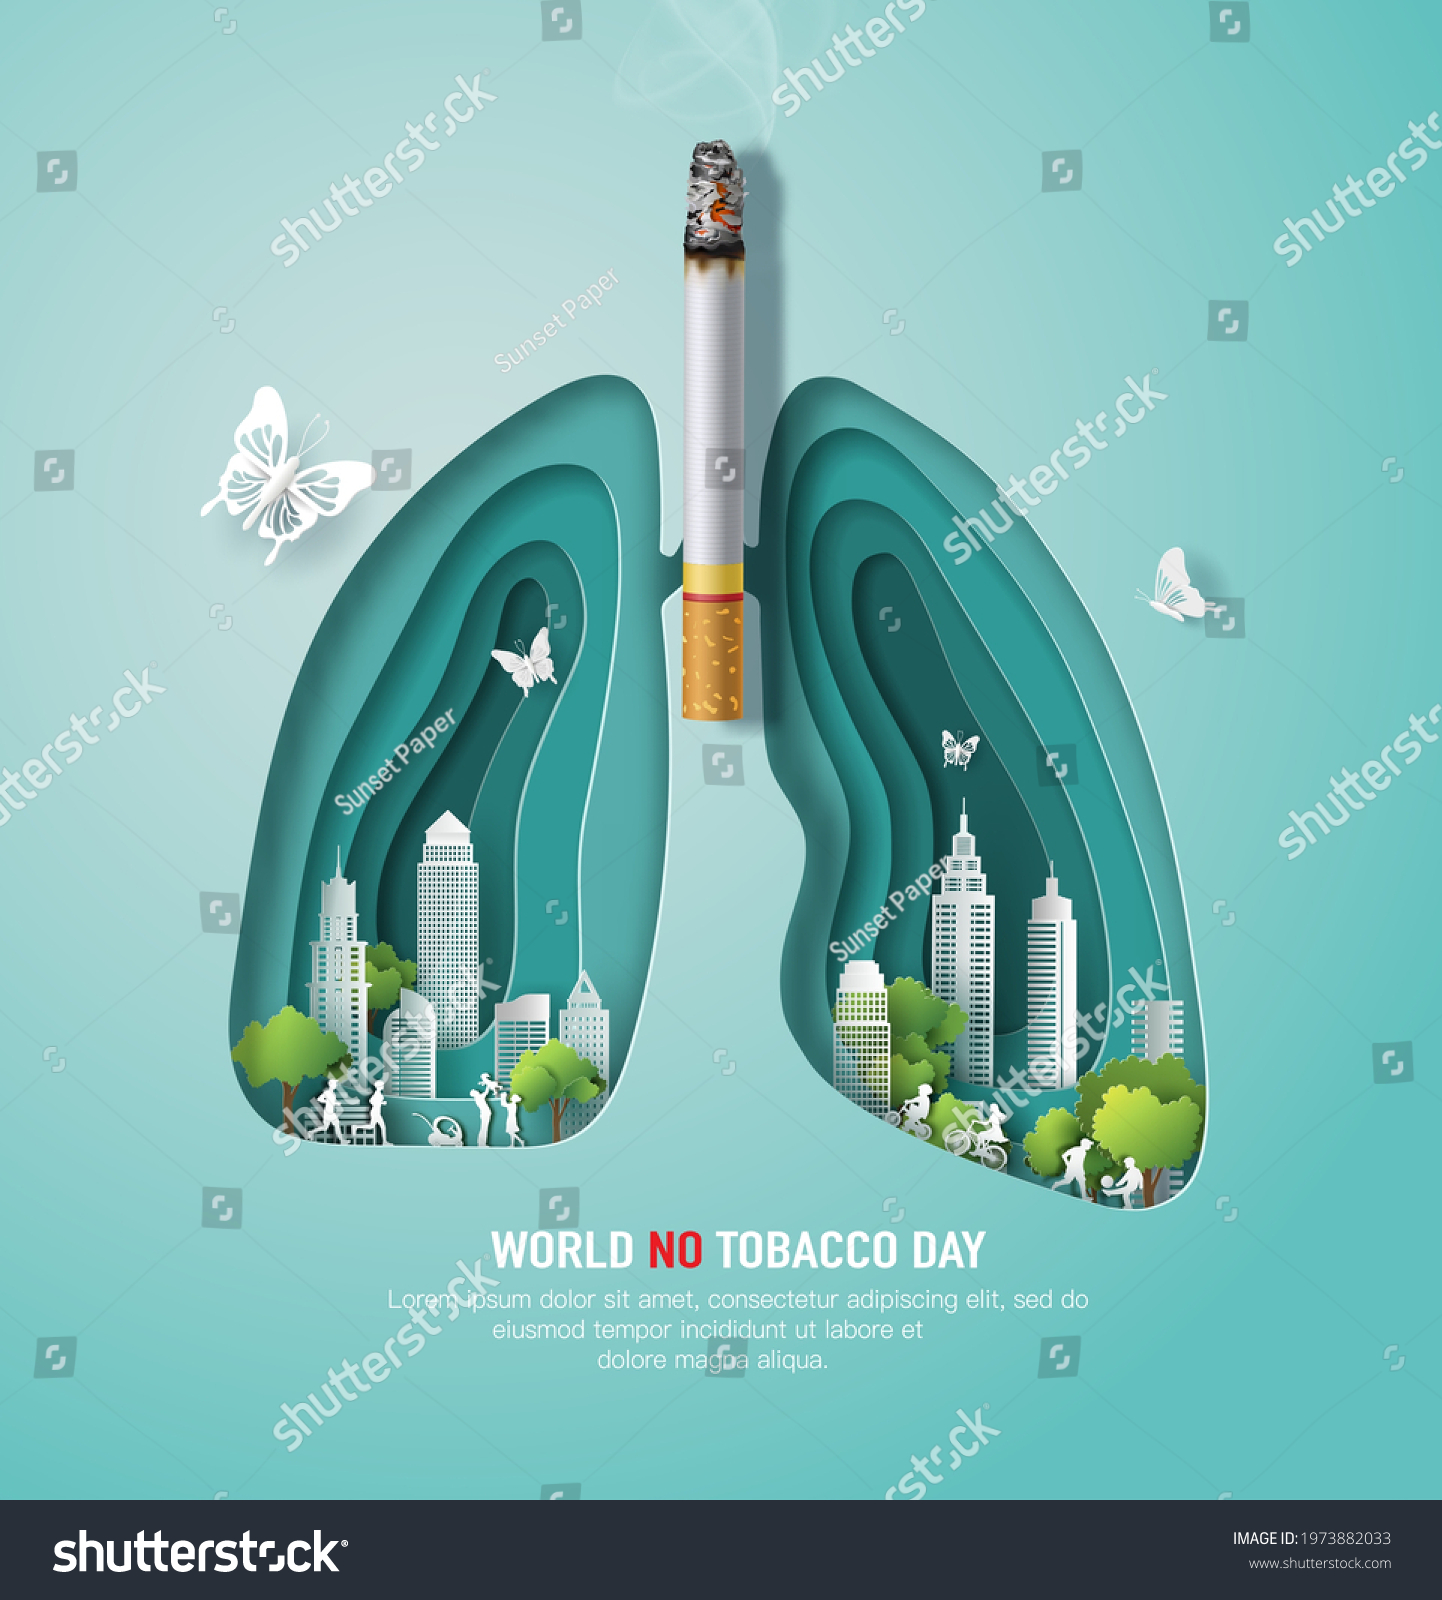 World No Tobacco day, banner design, a lung shape with many people, city and cigarette, paper illustration, and 3d paper. #1973882033